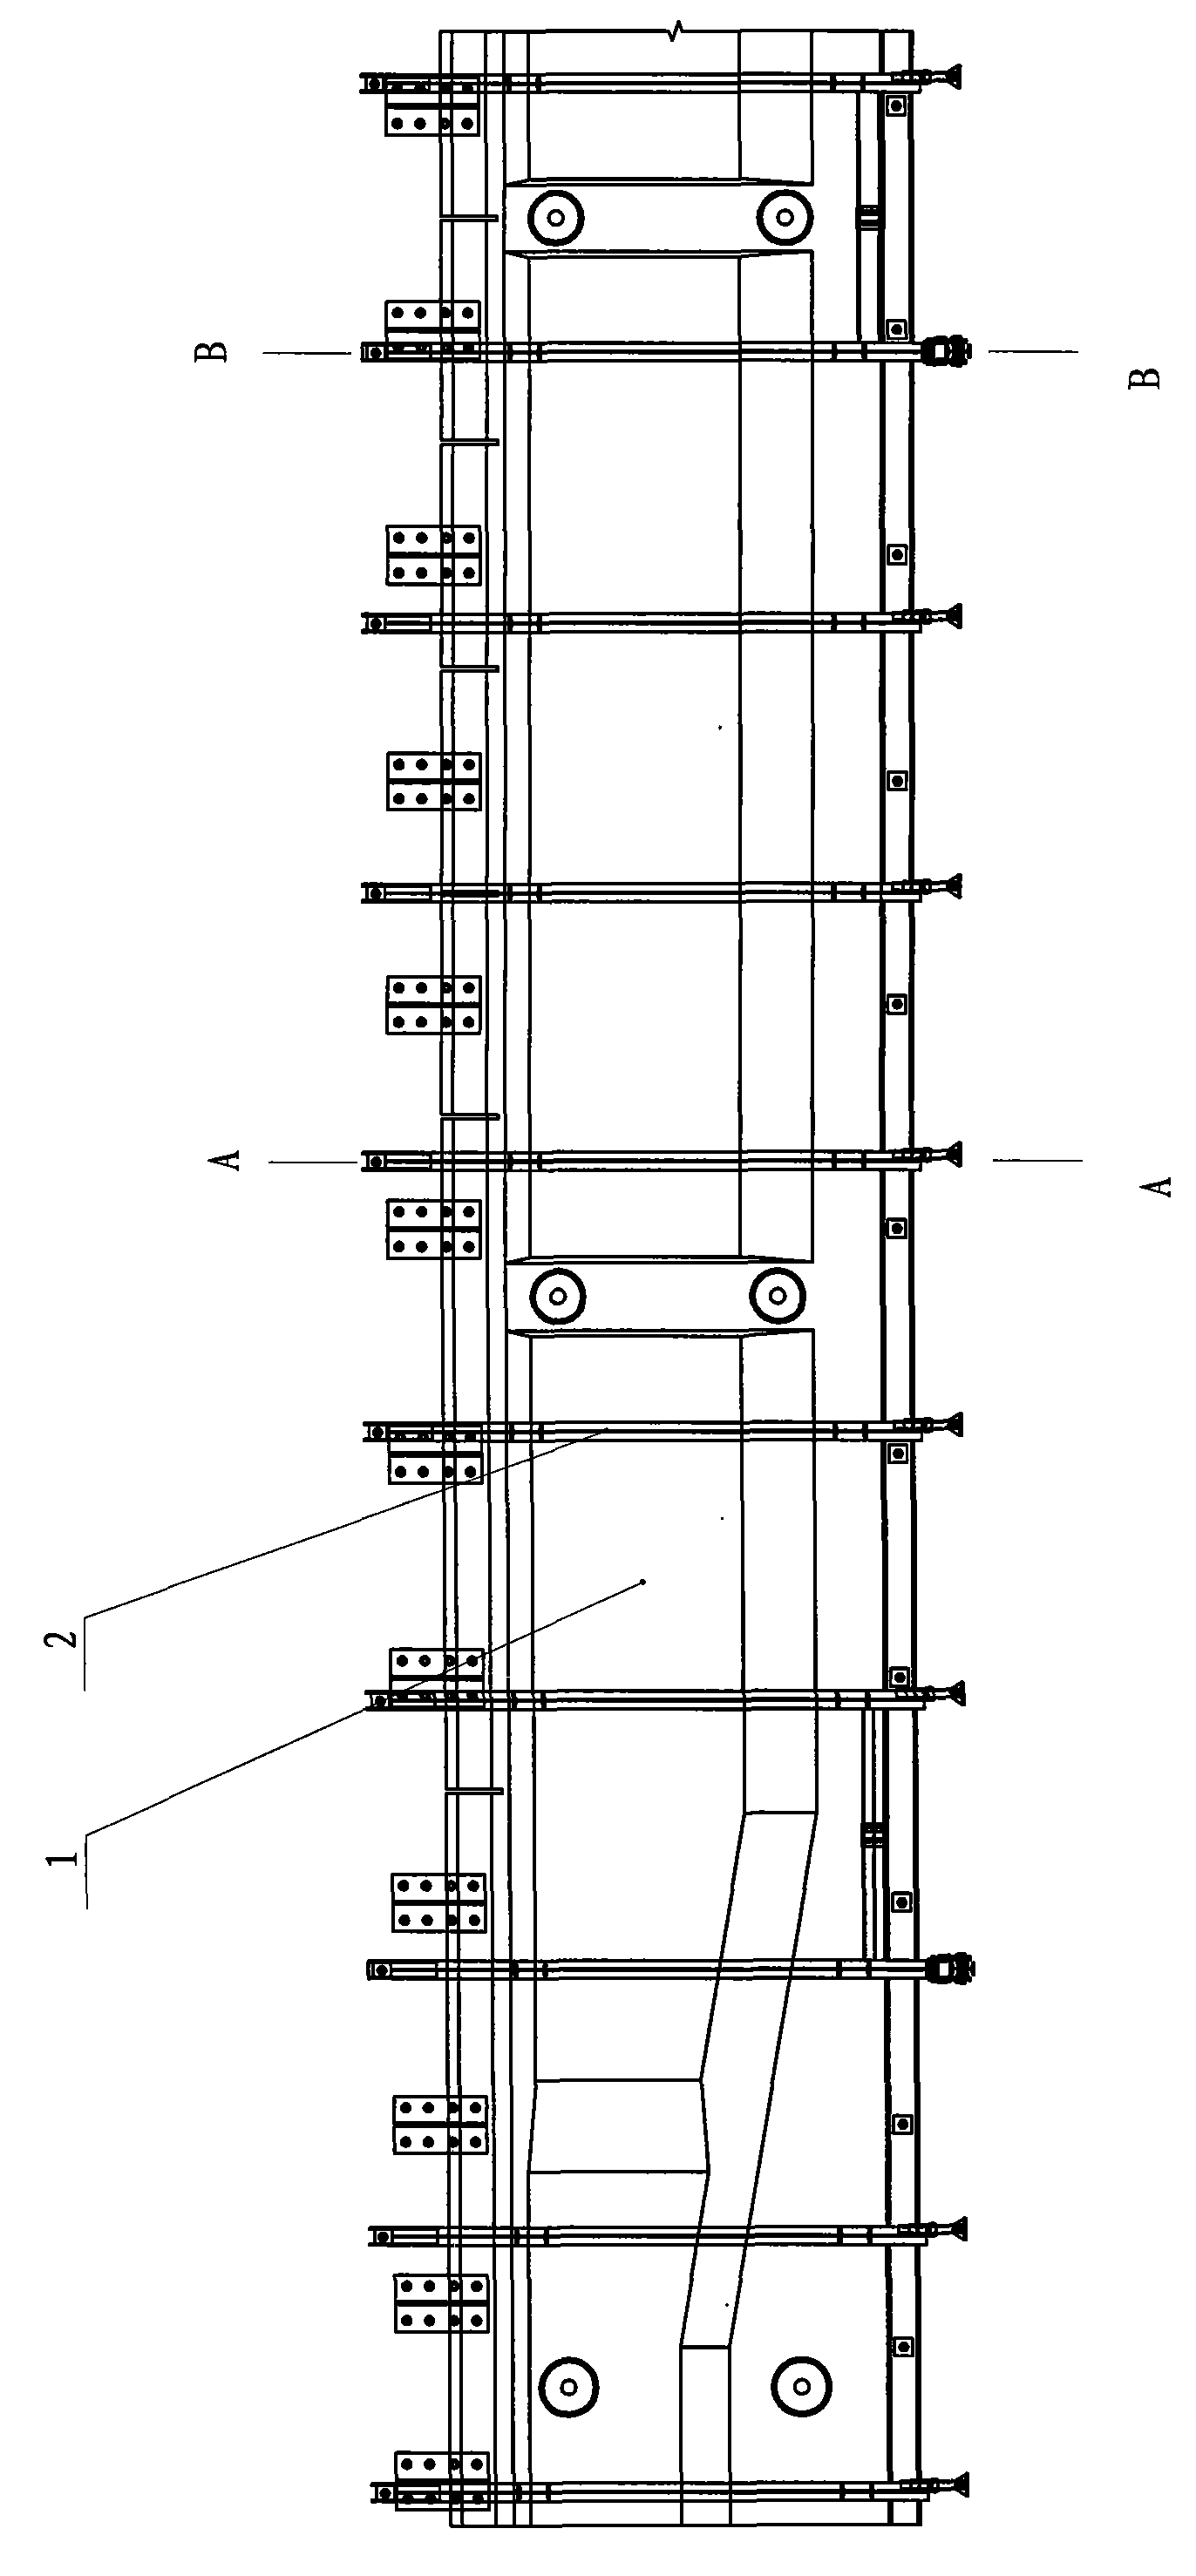 Template system capable of internally erecting and detaching mould